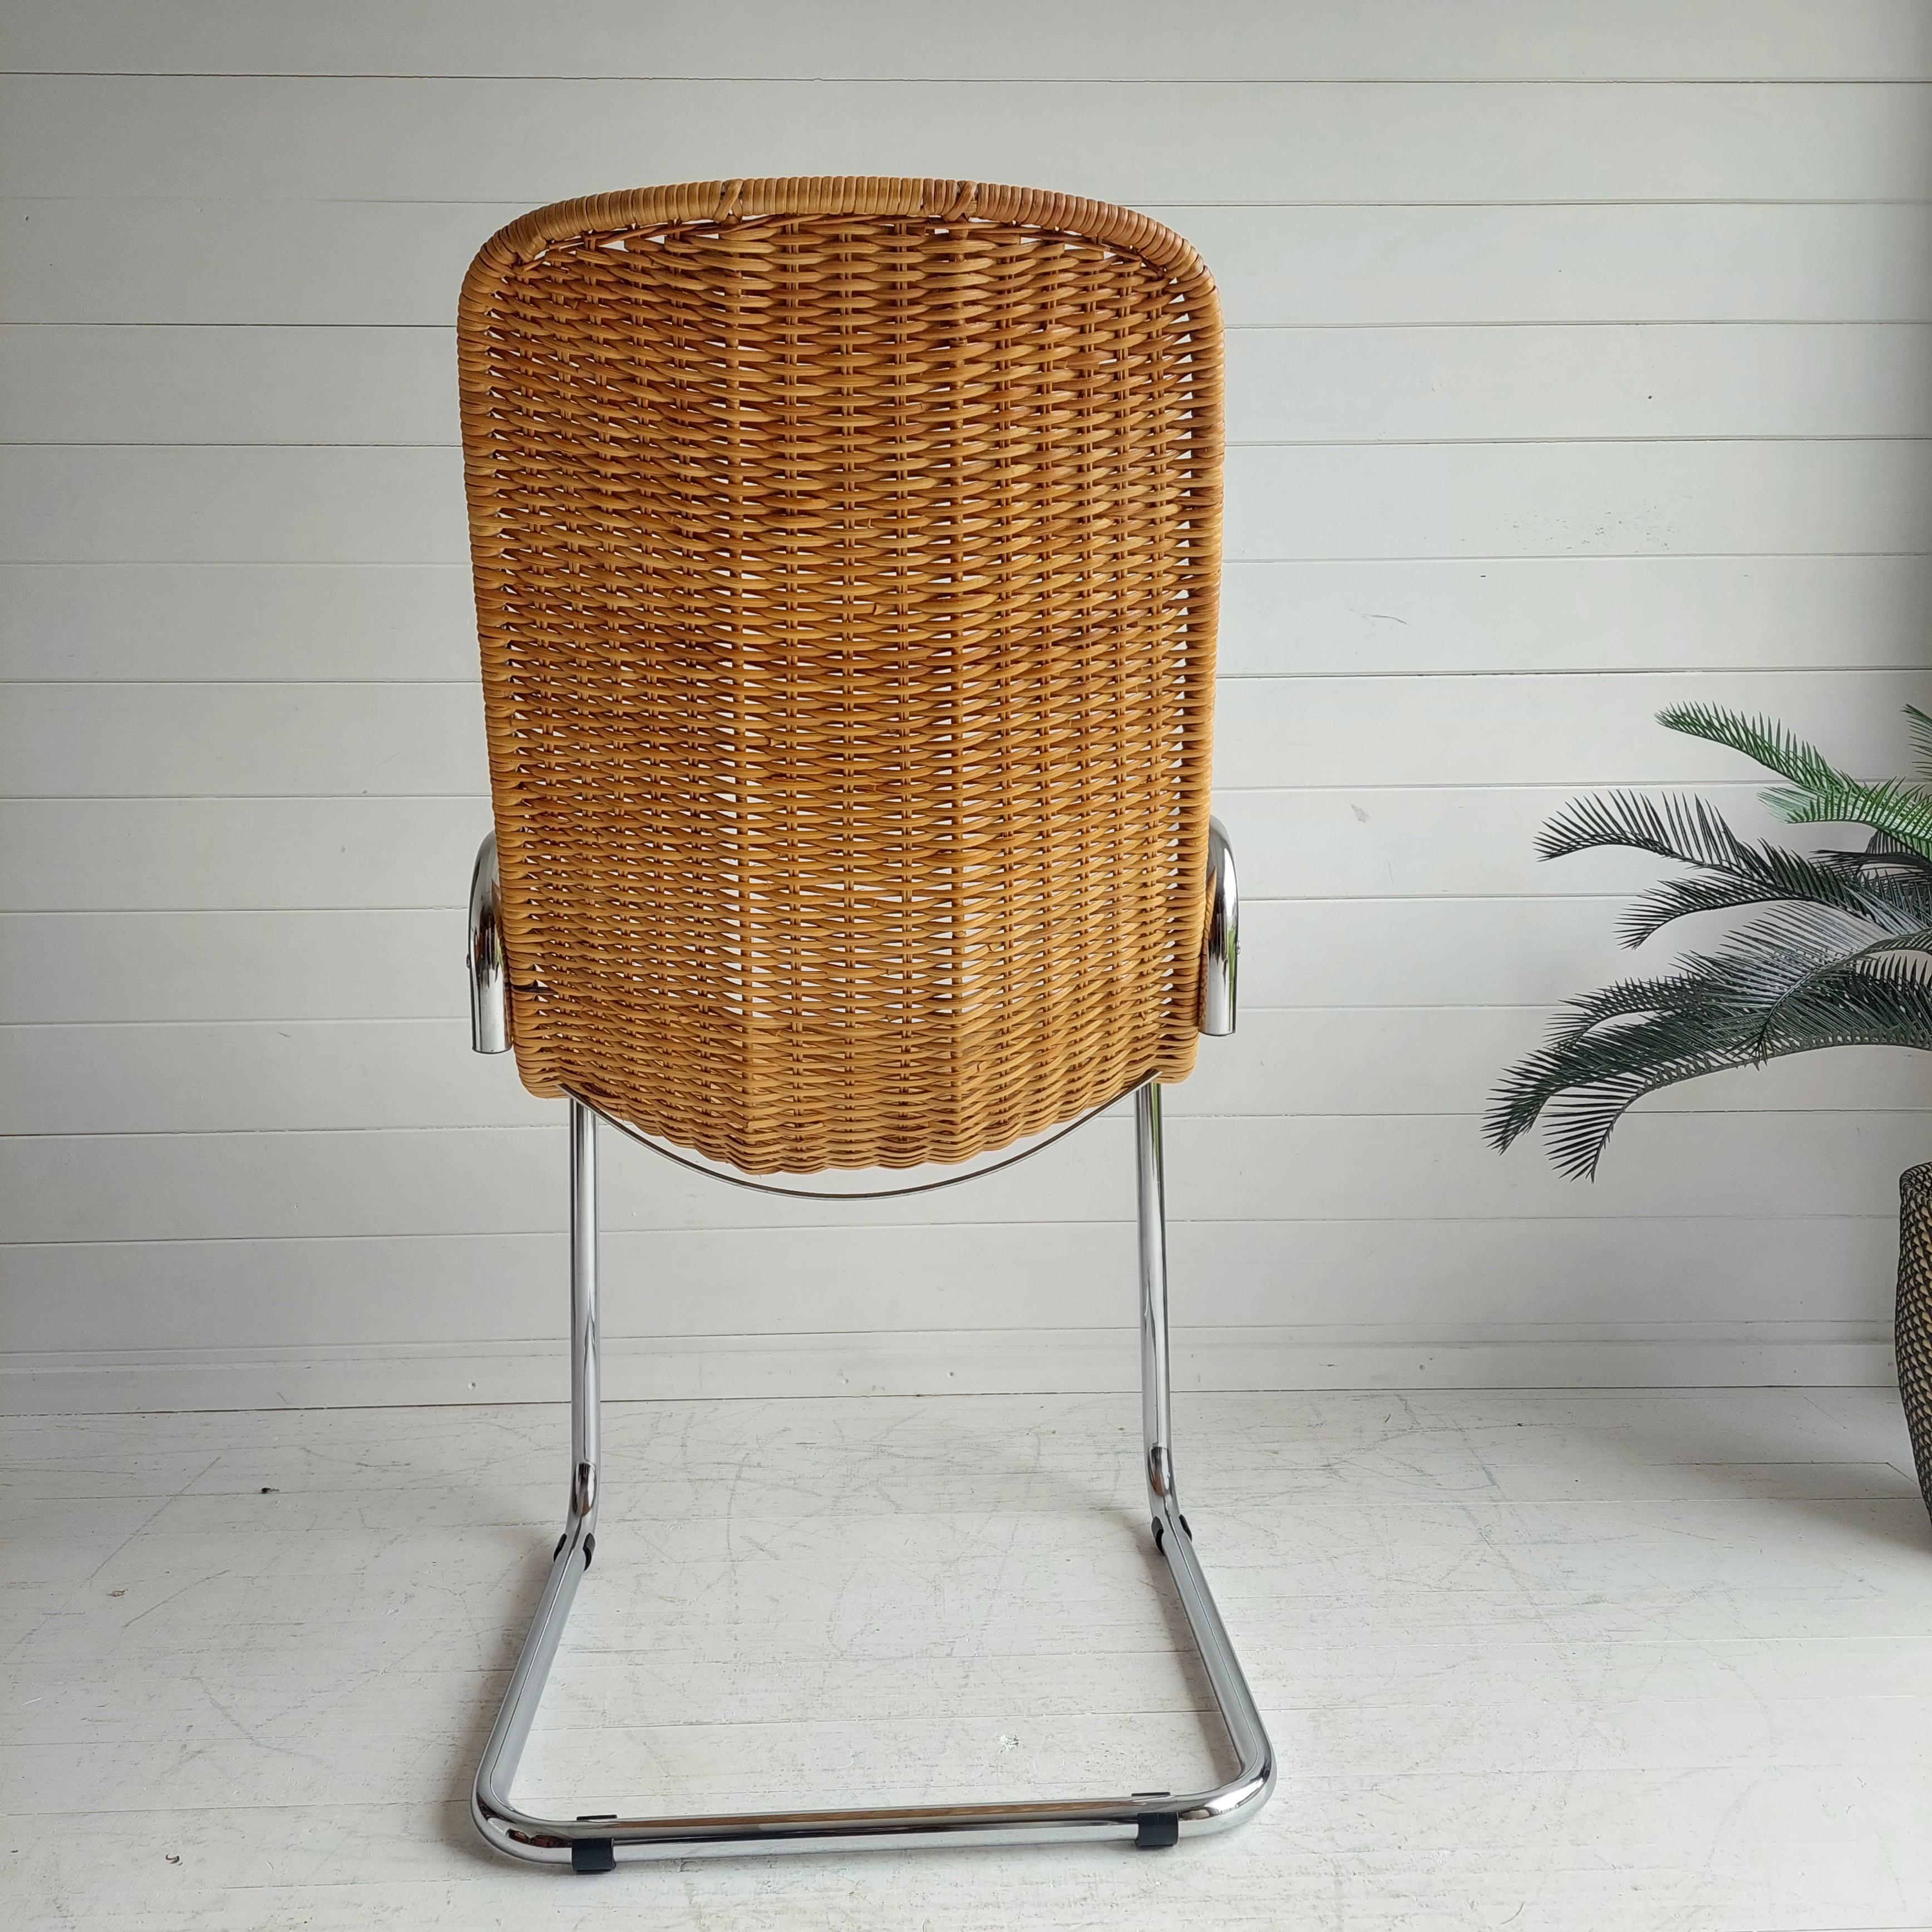 Mid-Century Modern Mid Century Chrome and Rattan Chair Cantilever Breuer MR20 Style Wicker, 1970s